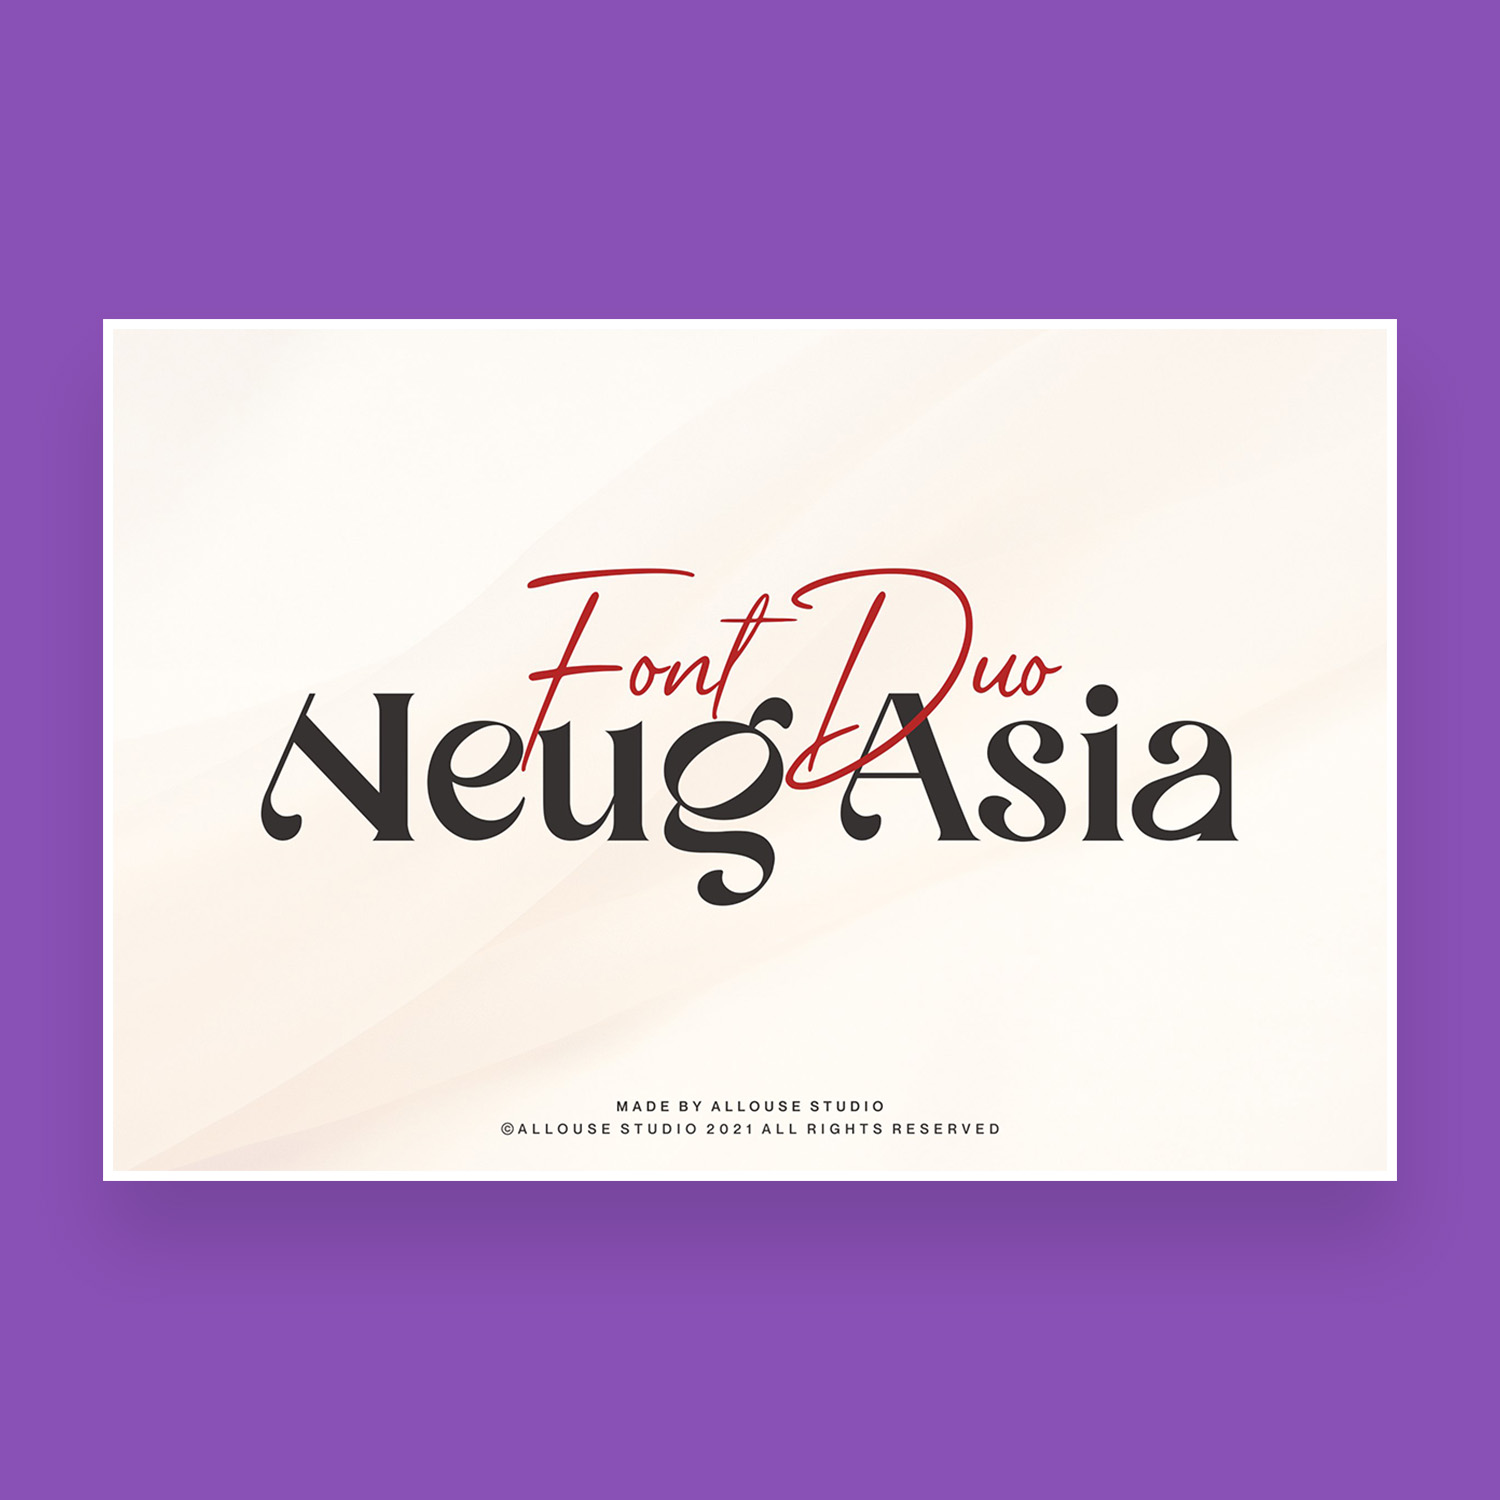 neug asia beautiful two styles font cover image.